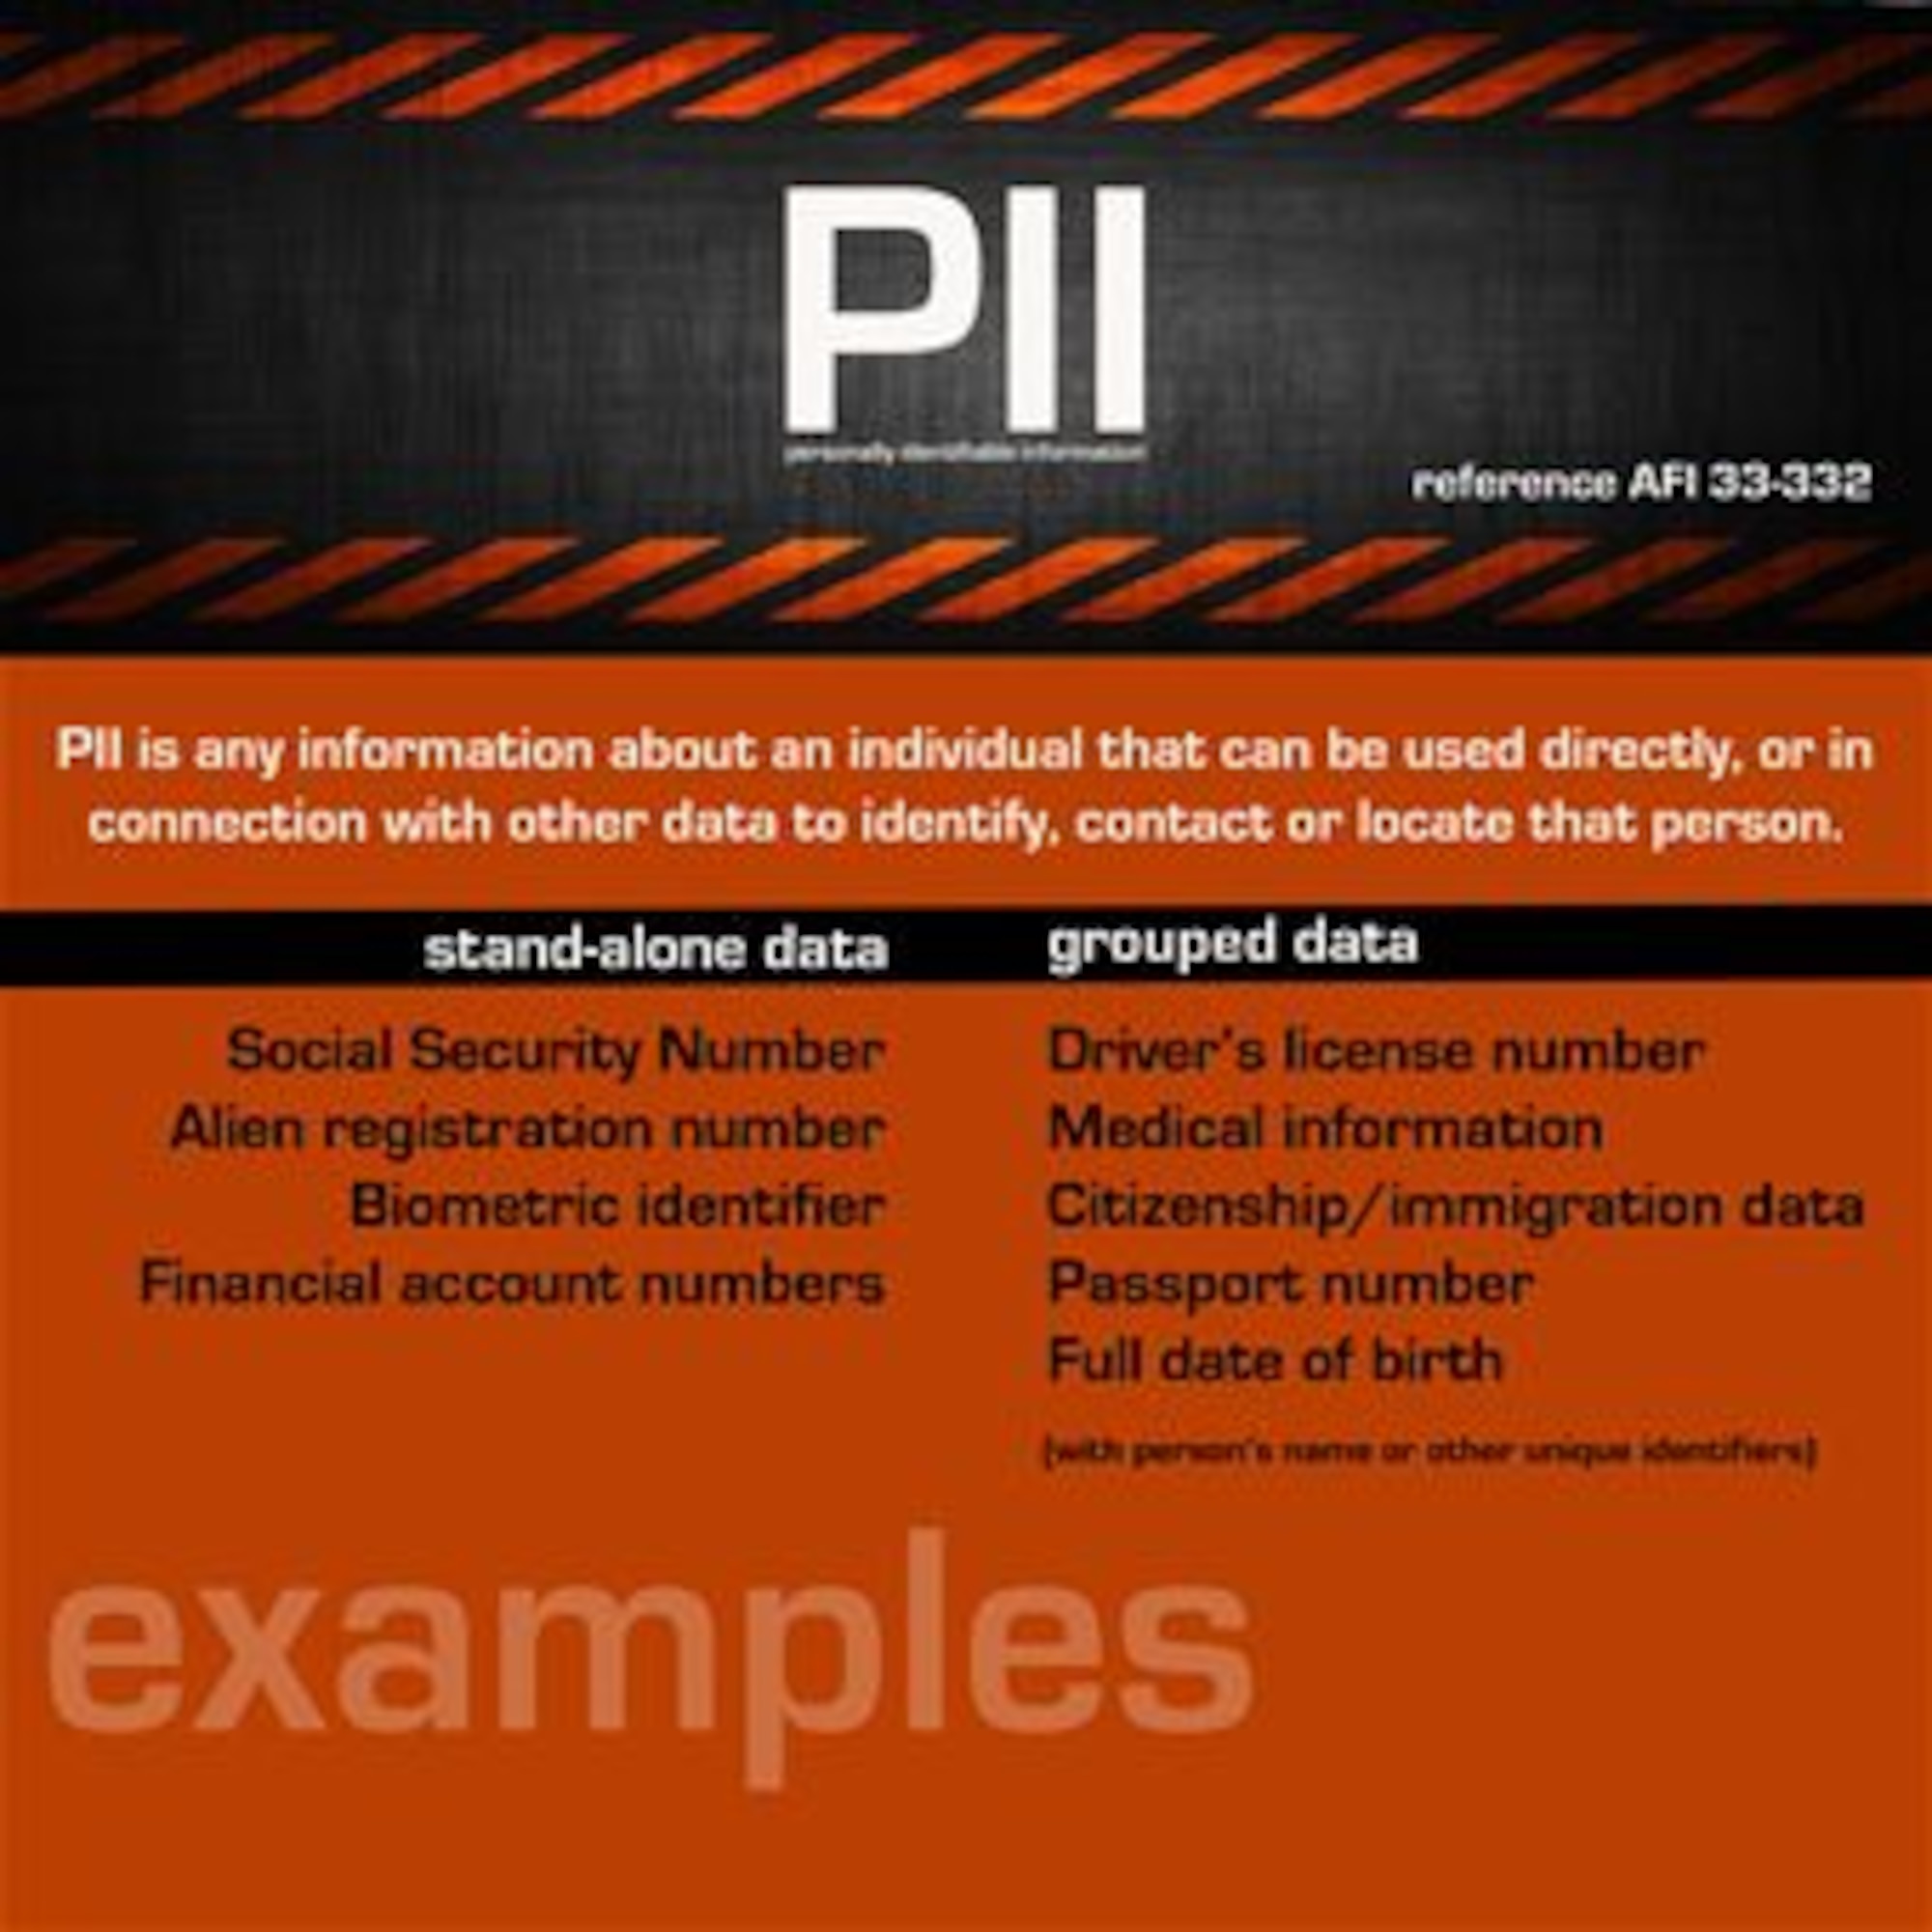 Personal identifiable information is information about an individual which identifies, links, relates, is unique to, or describes him or her, like SSN, age, military rank, civilian grade, marital status, race, salary, home or office (and any other) information which is linked or linkable to a specified individual. (Courtesy graphic)